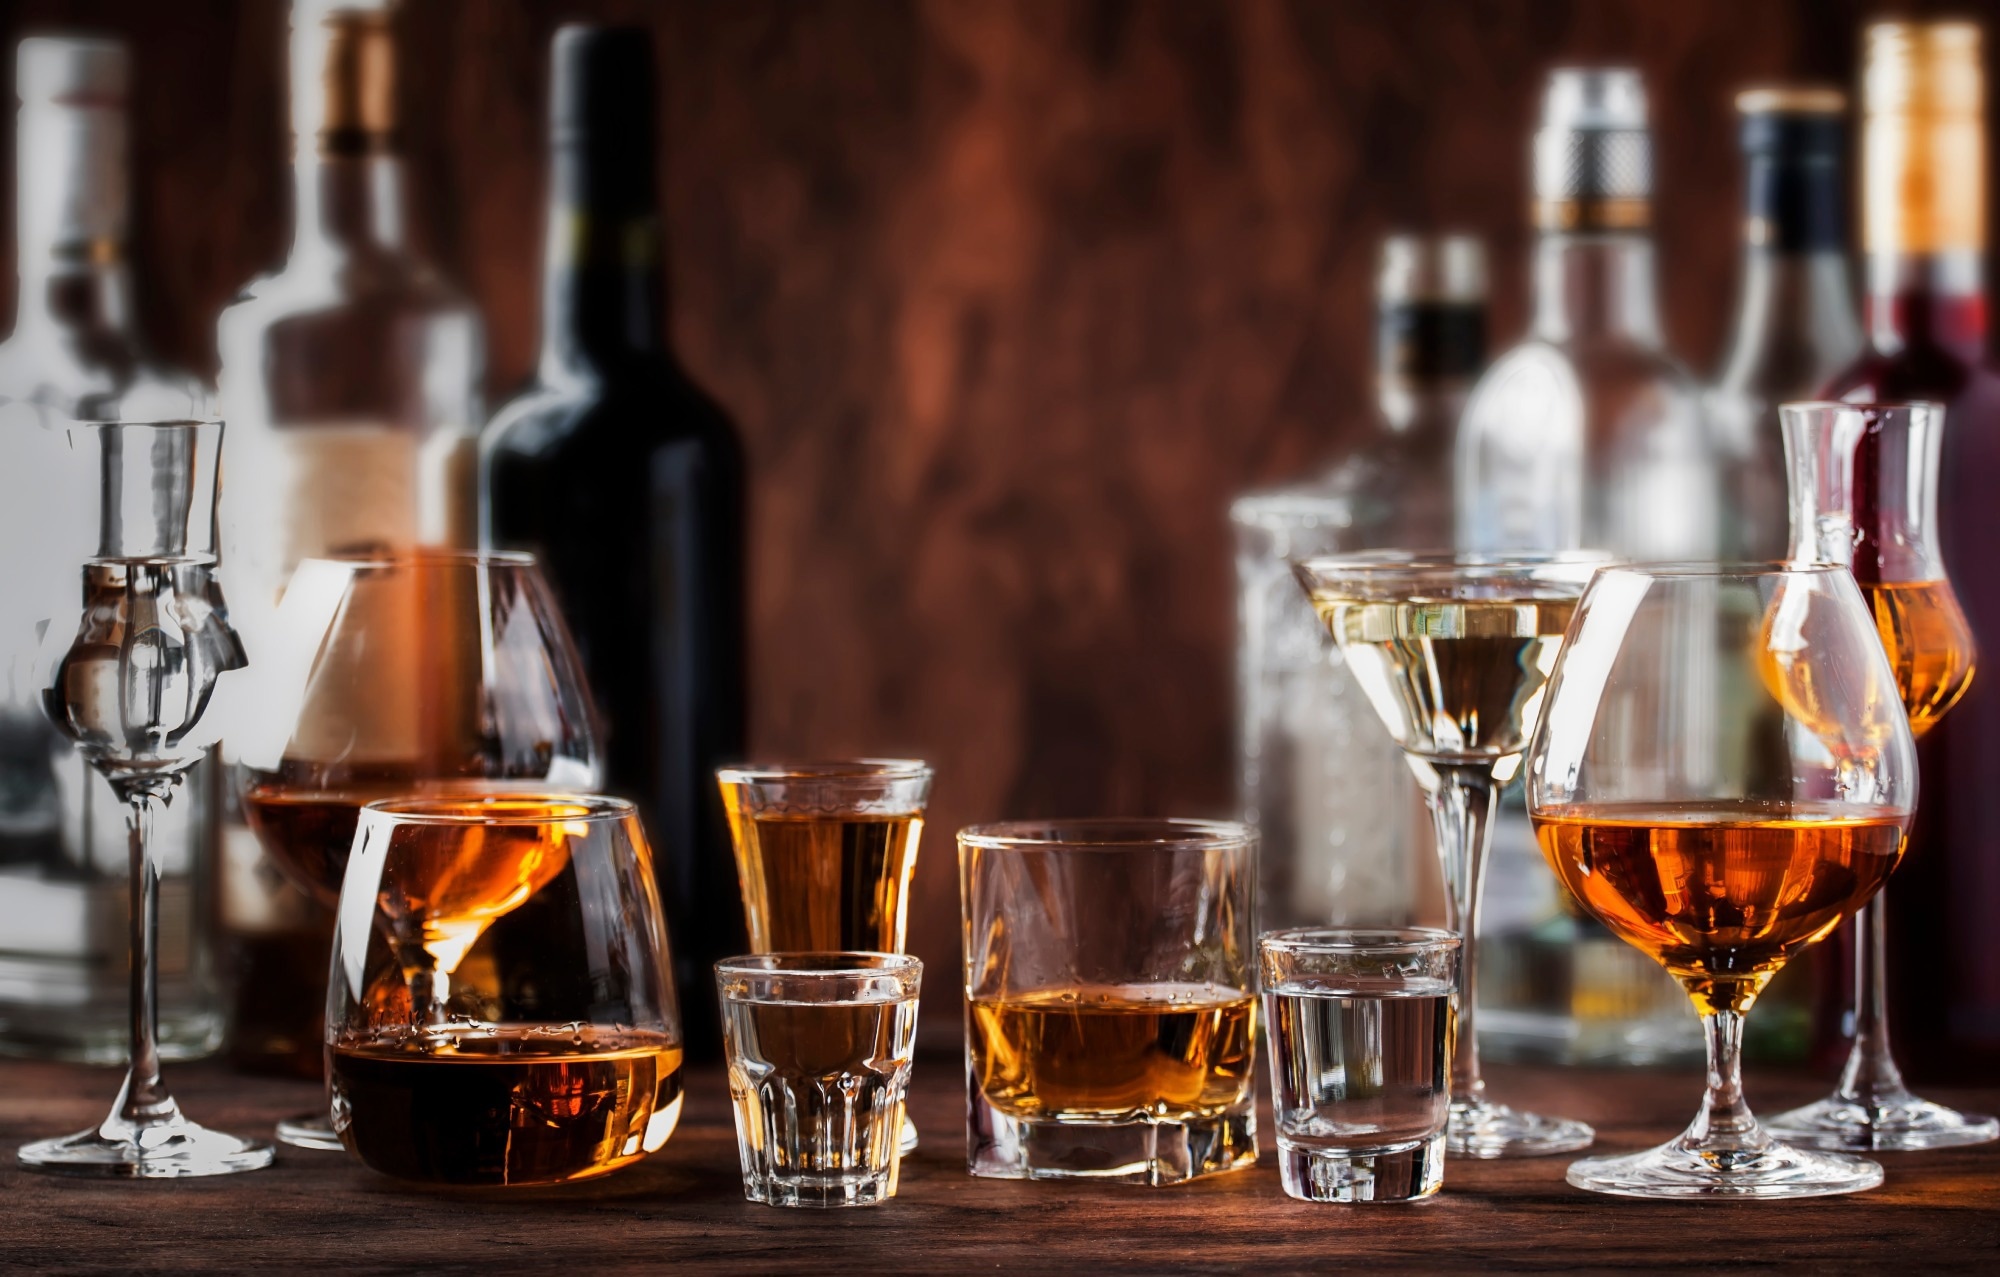 Study: Alcohol intake and cause-specific mortality: conventional and genetic evidence in a prospective cohort study of 512 000 adults in China. Image Credit: 5PH/Shutterstock.com